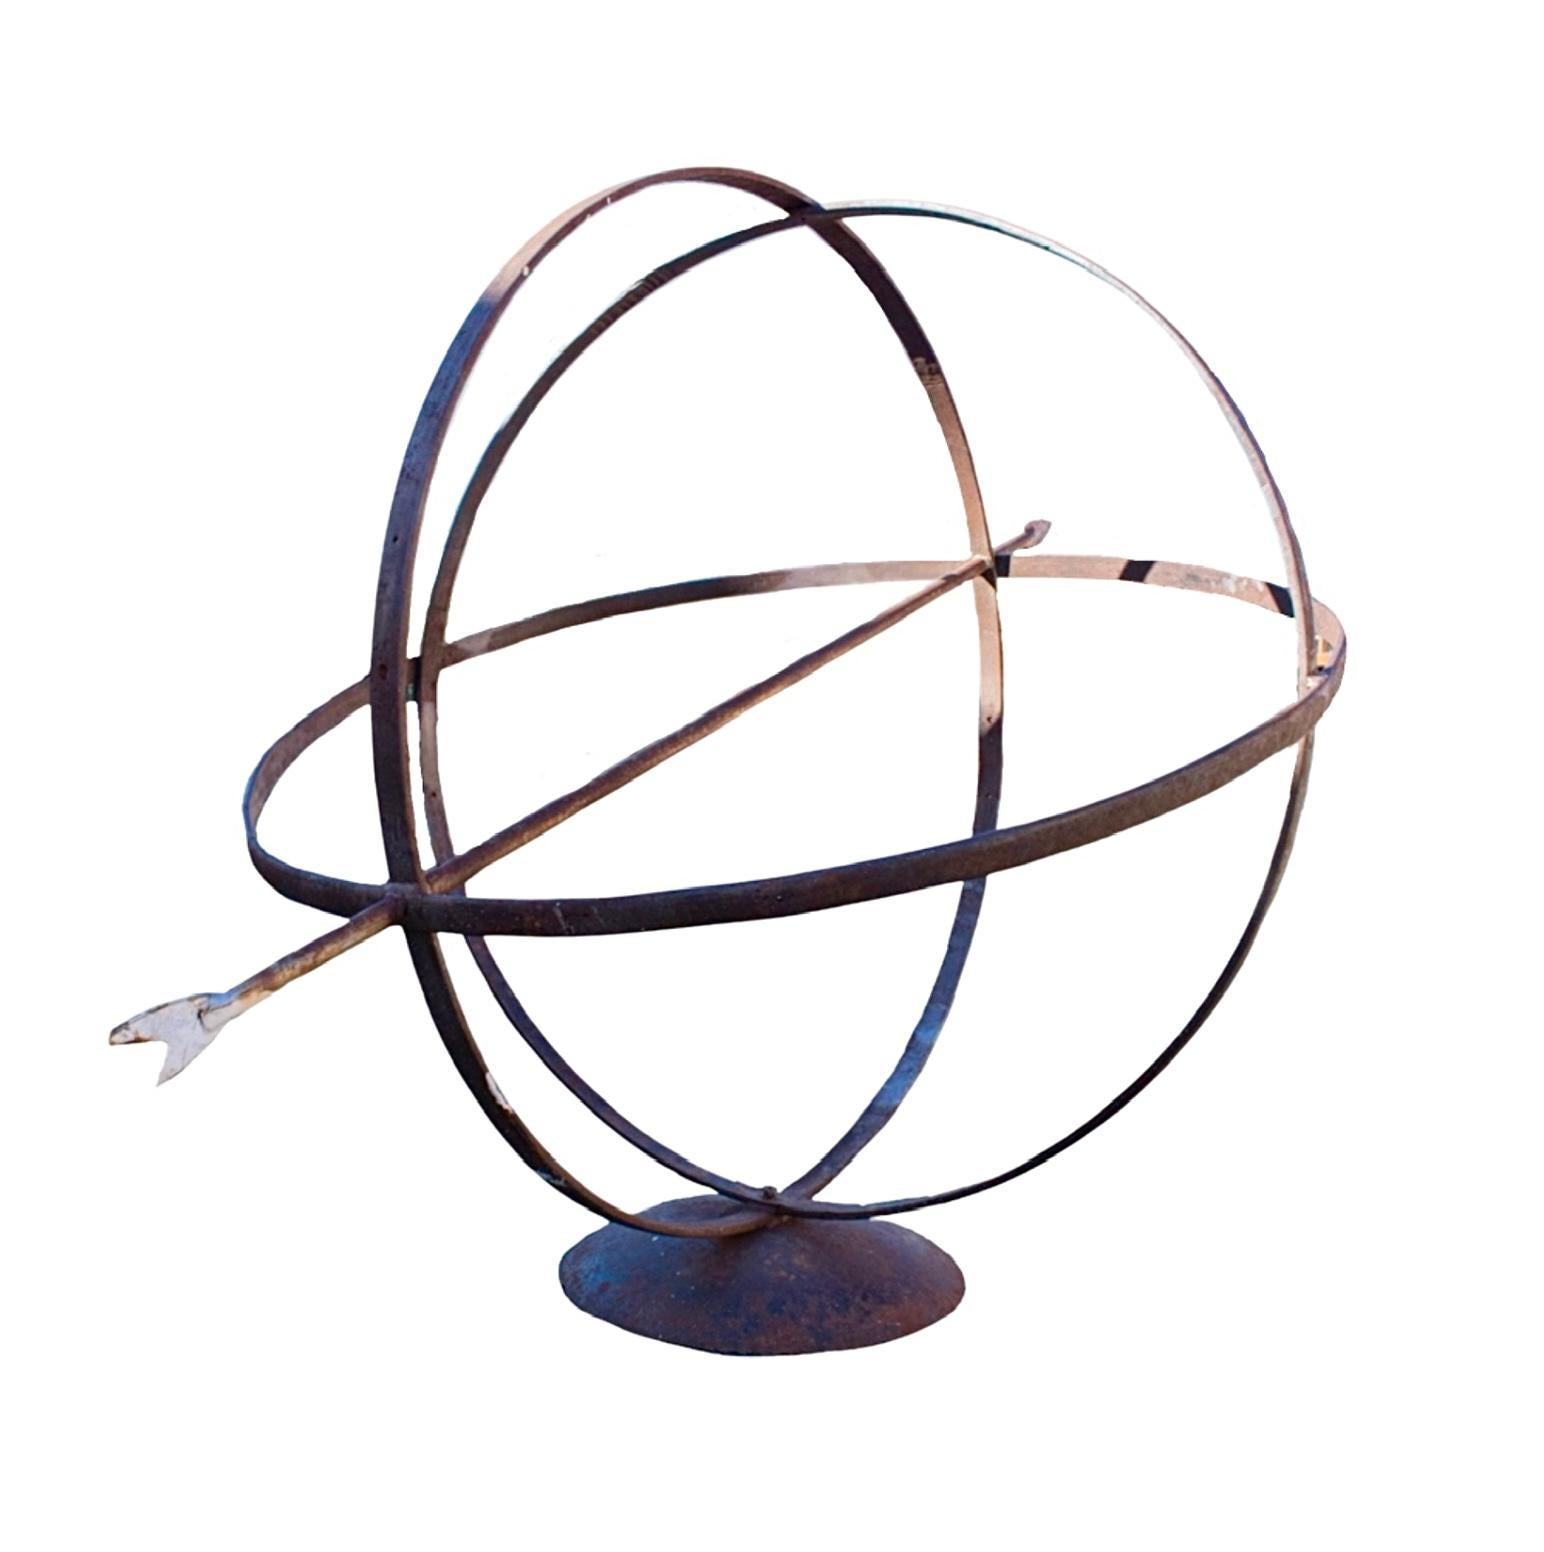 This antique French Iron Armillary, dating back to the 1920s, is a stunning piece of craftsmanship. Made entirely out of iron, it boasts a large size and intricate design. As a decorative and historical piece, it is the perfect addition to any home